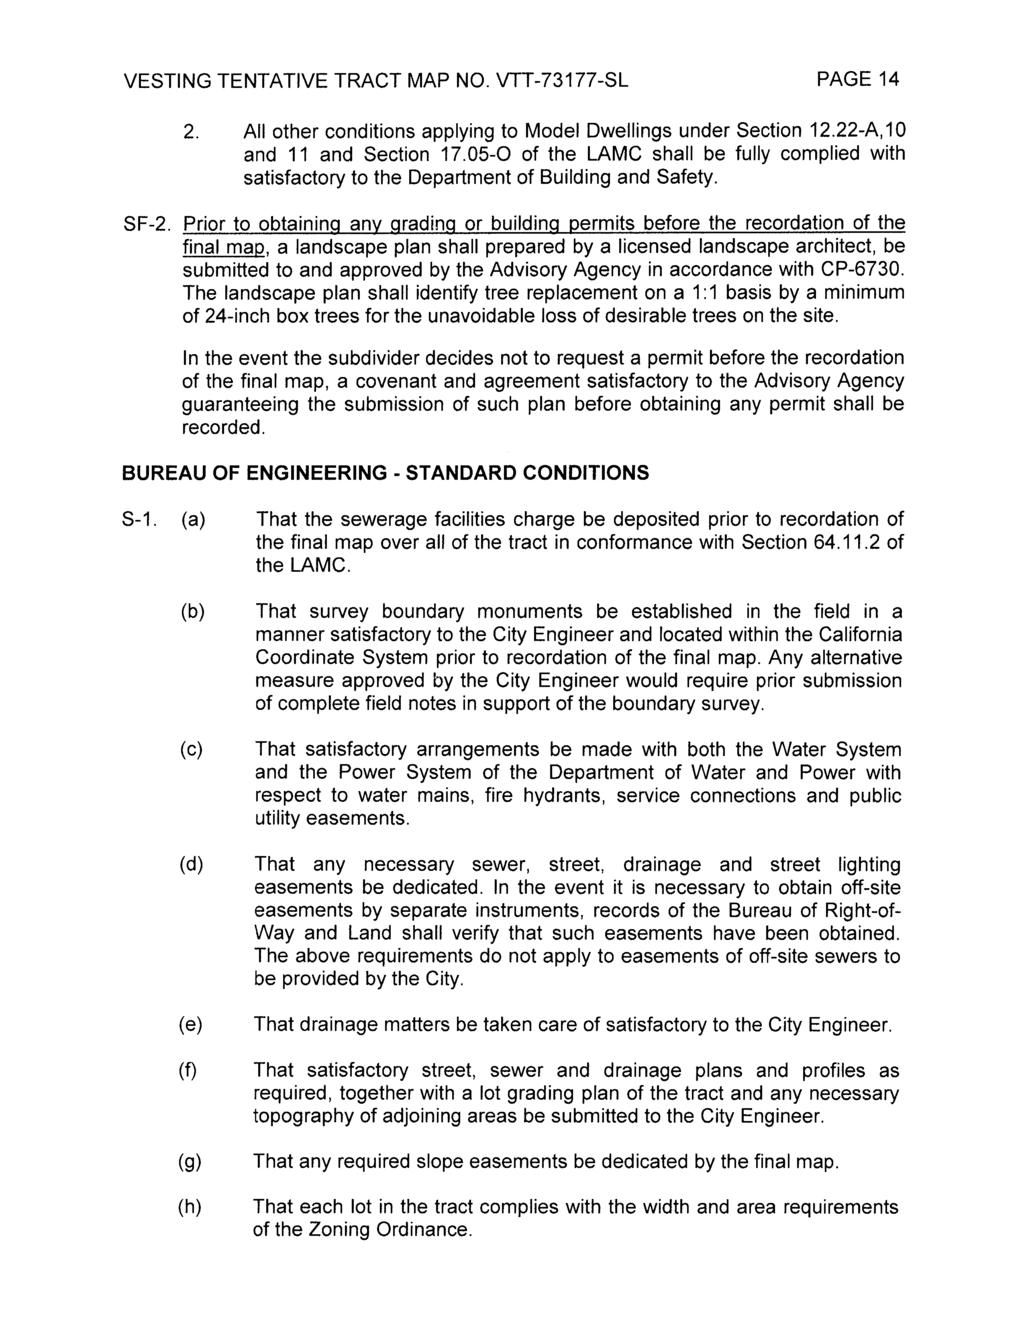 PAGE 14 2. All other conditions applying to Model Dwellings under Section 12.22-A.10 and 11 and Section 17.